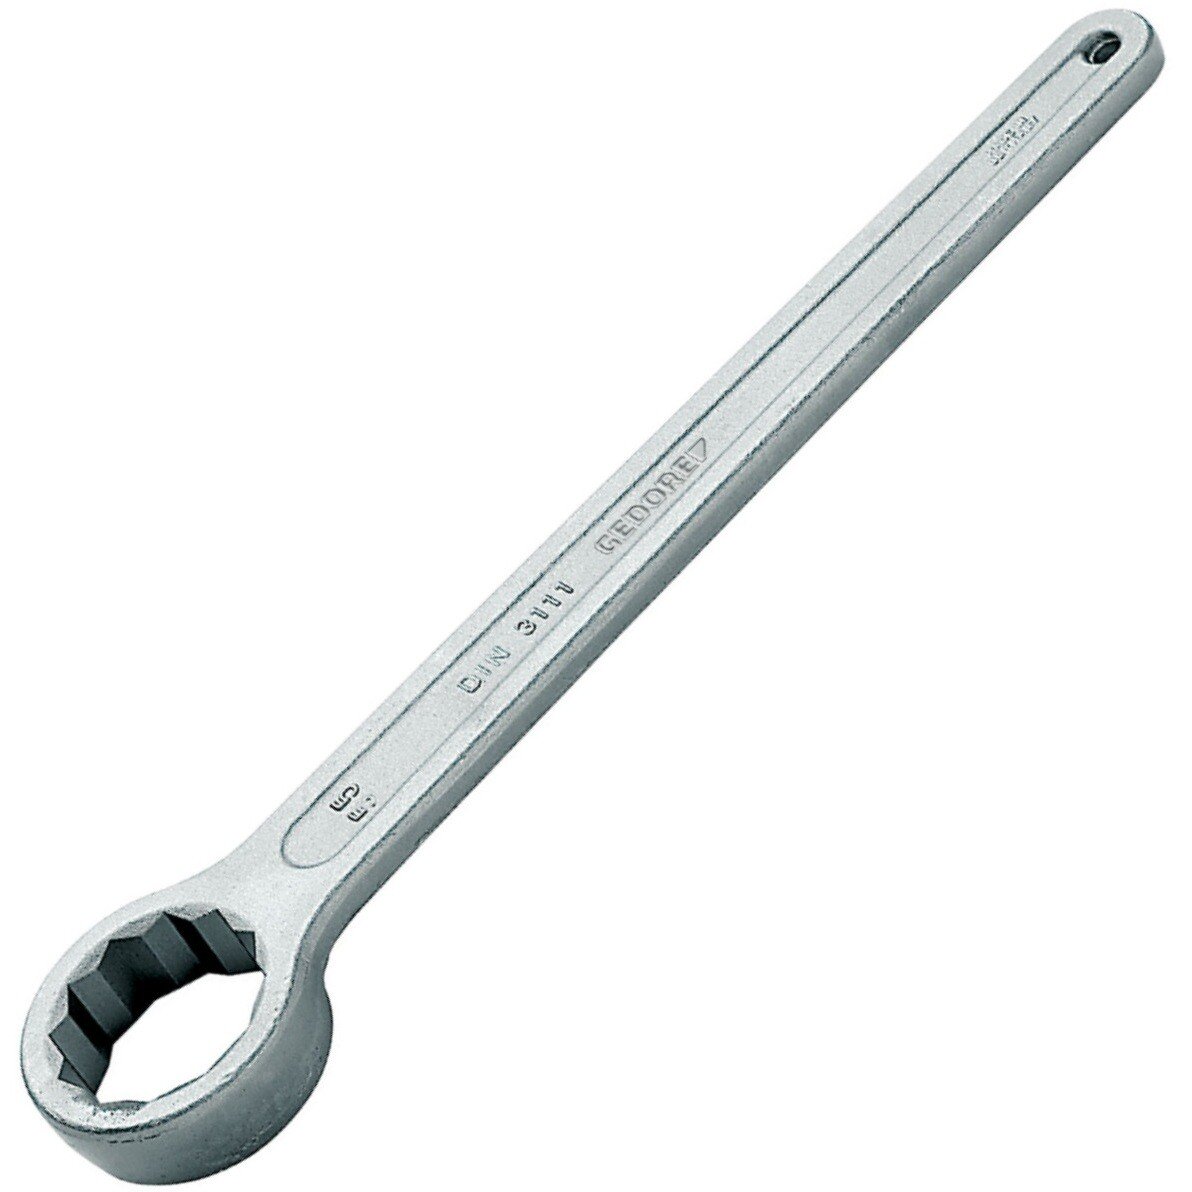 Gedore 6481910 41mm Deep Ring Spanner 308 41